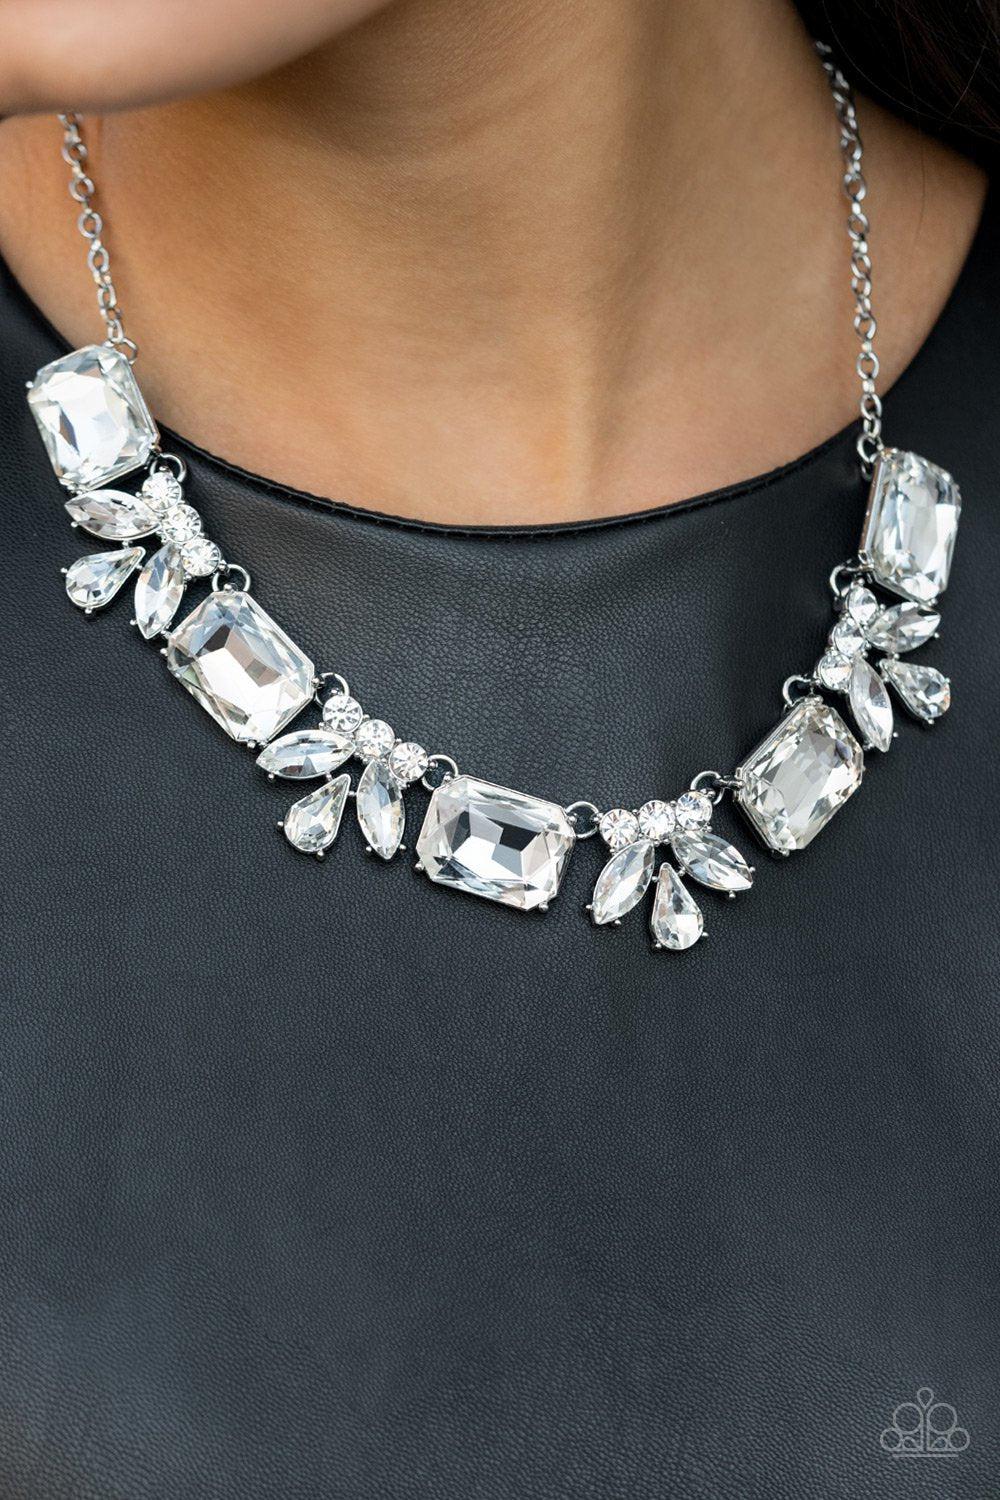 Long Live Sparkle White Rhinestone Necklace - Paparazzi Accessories 2021 EMP Exclusive - model -CarasShop.com - $5 Jewelry by Cara Jewels